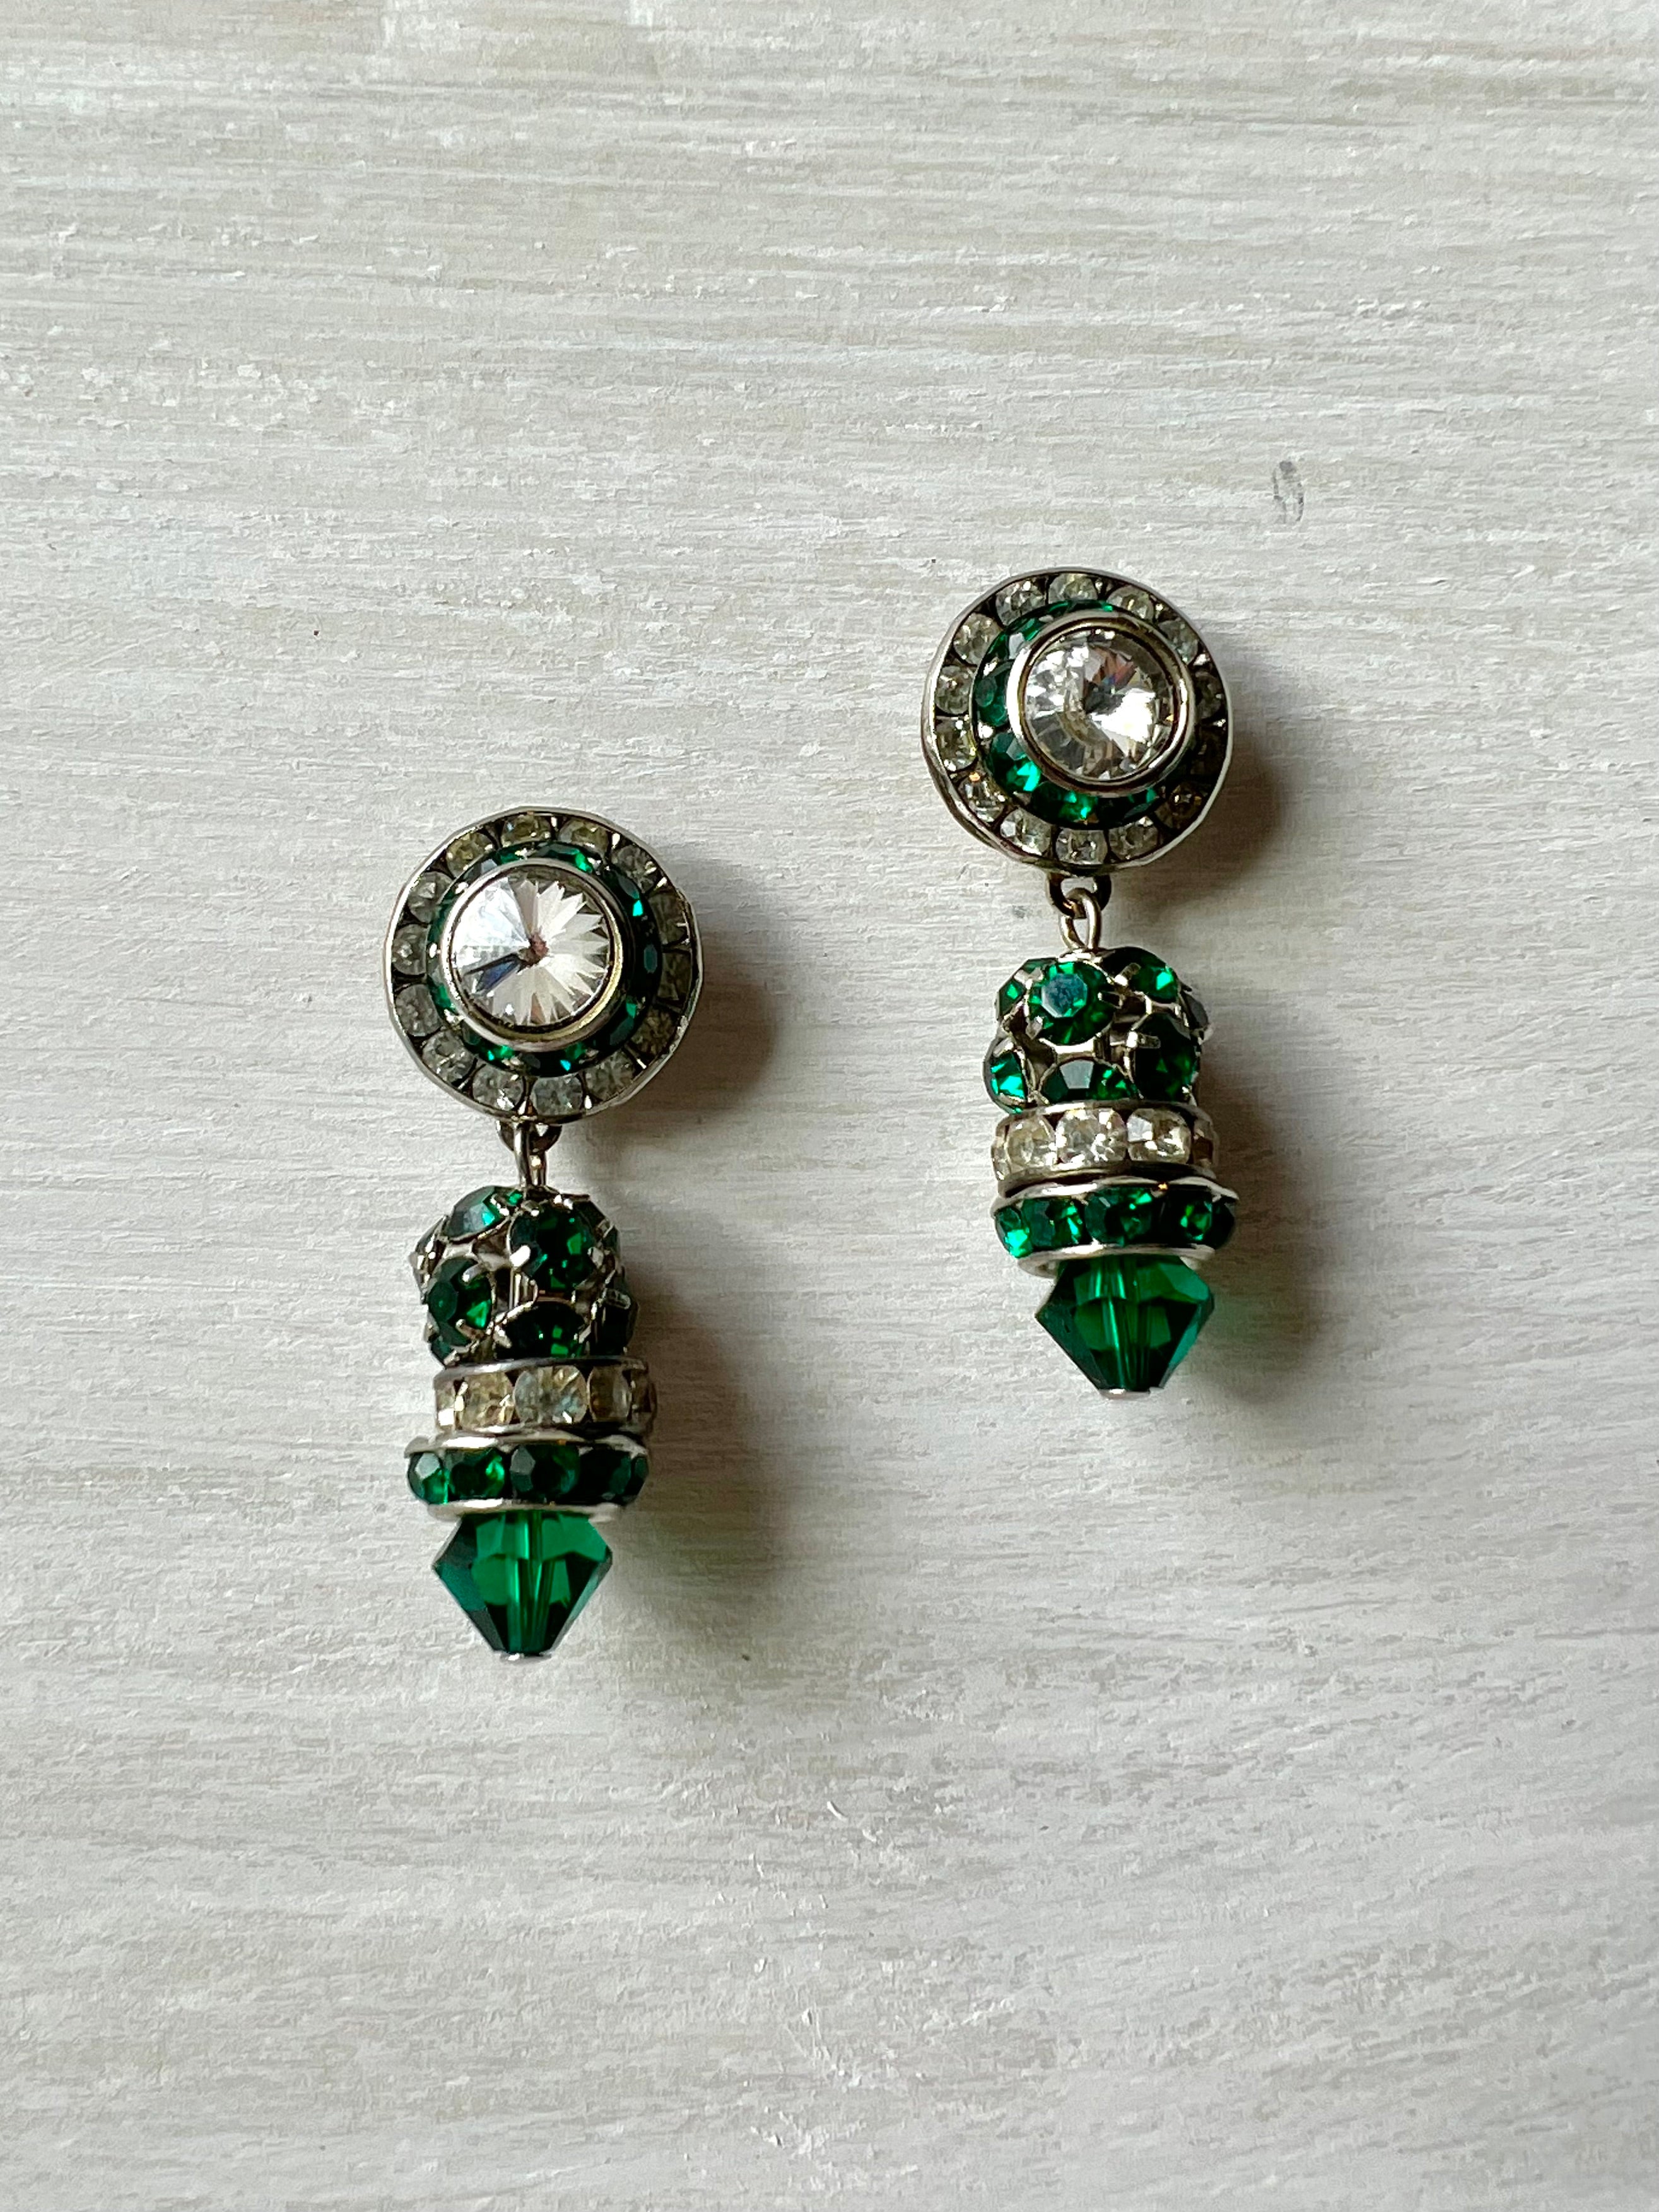 RGS-E018: Handcrafted Crystal Earrings